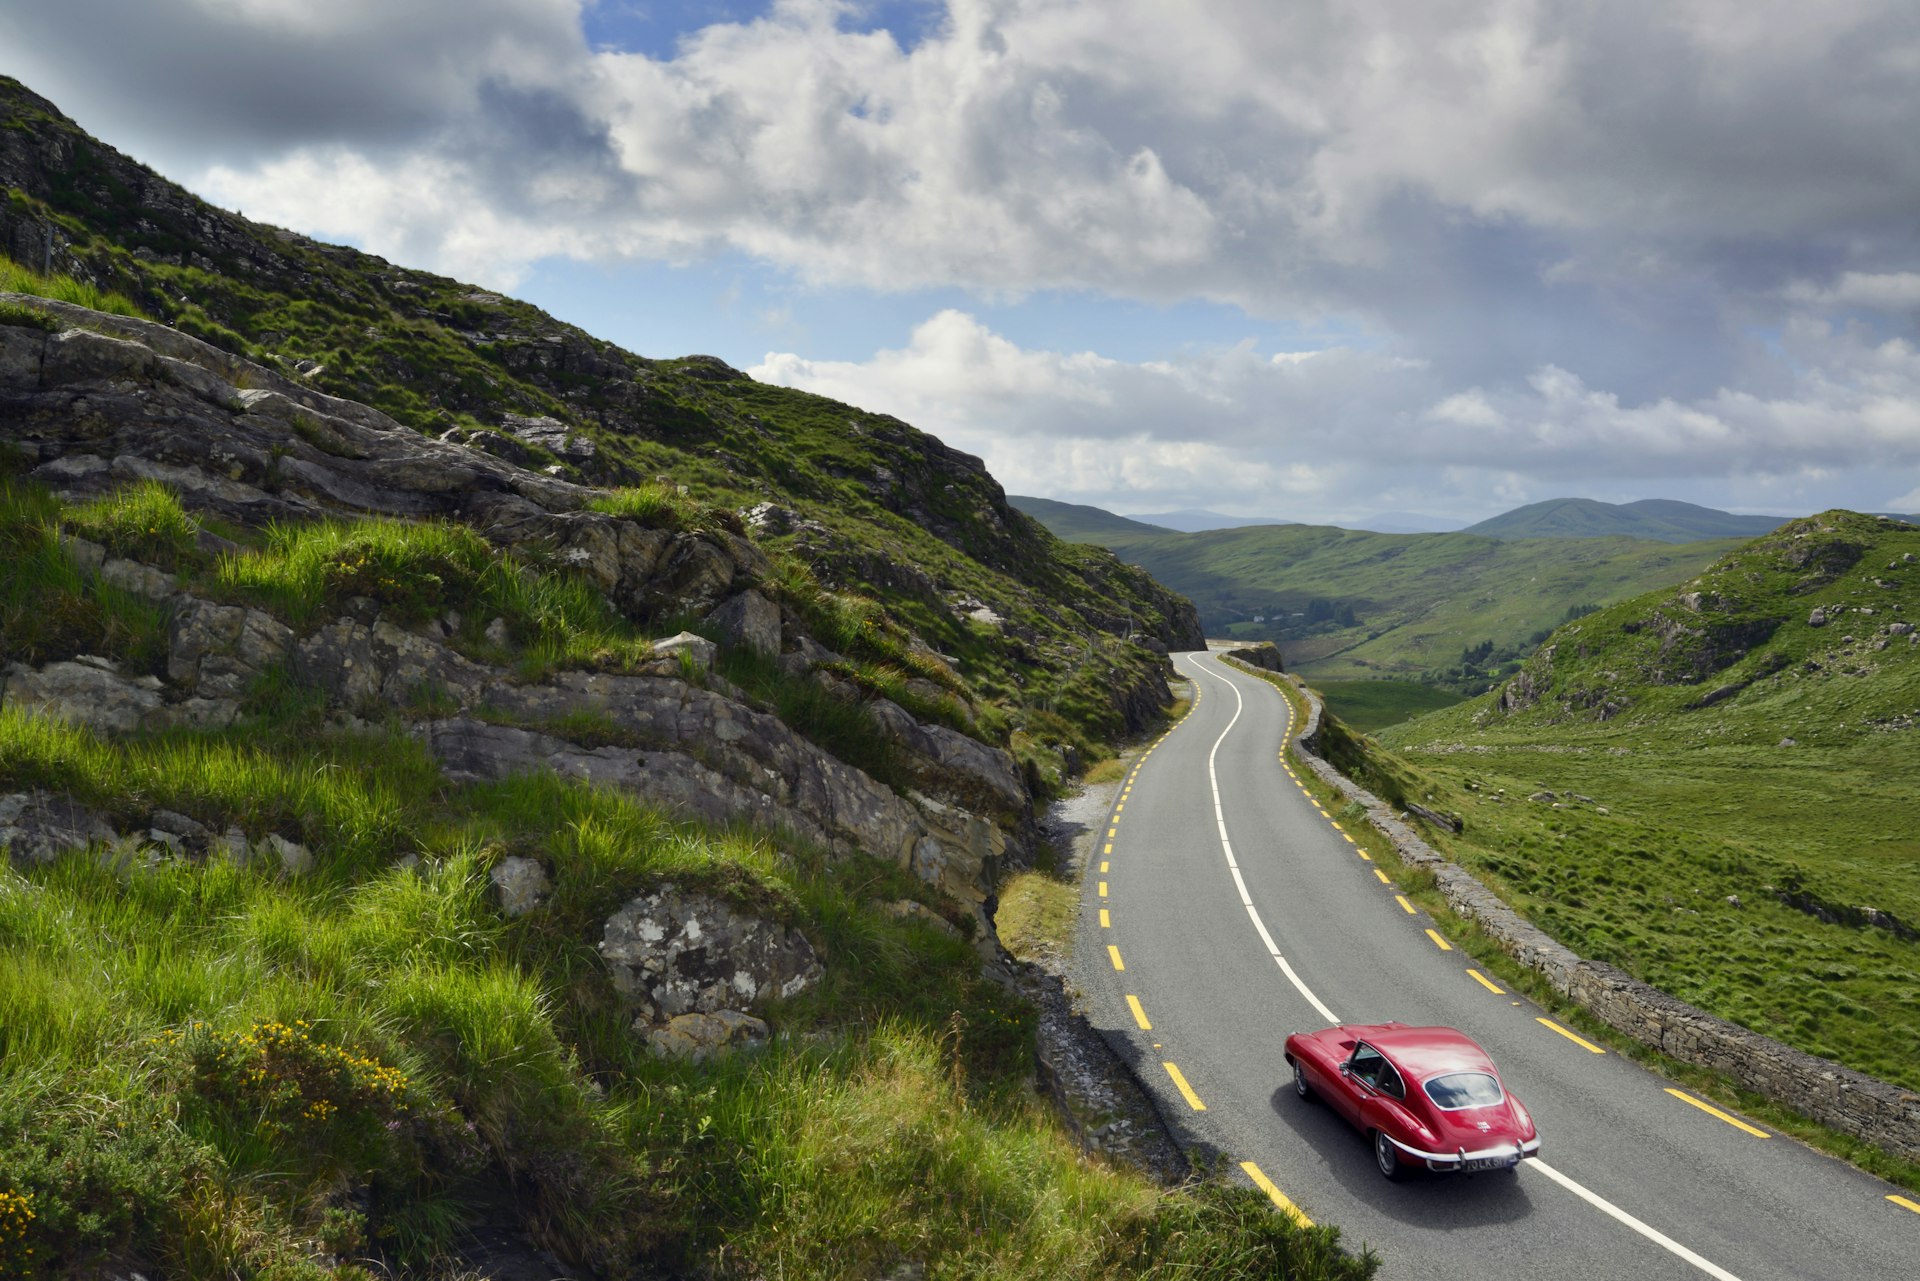 E-Type Jaguar driving on country road between Kenmare and Killarney, County Kerry, Ireland